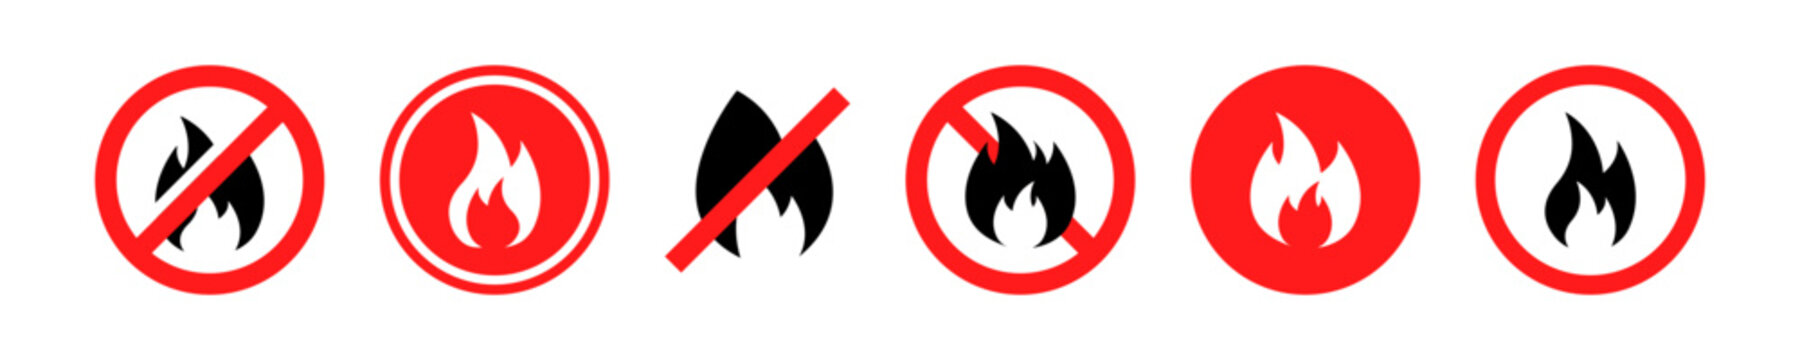 Set of no fire vector icons. Red forbidden signs of ban campfire or flame. Vector 10 Eps.